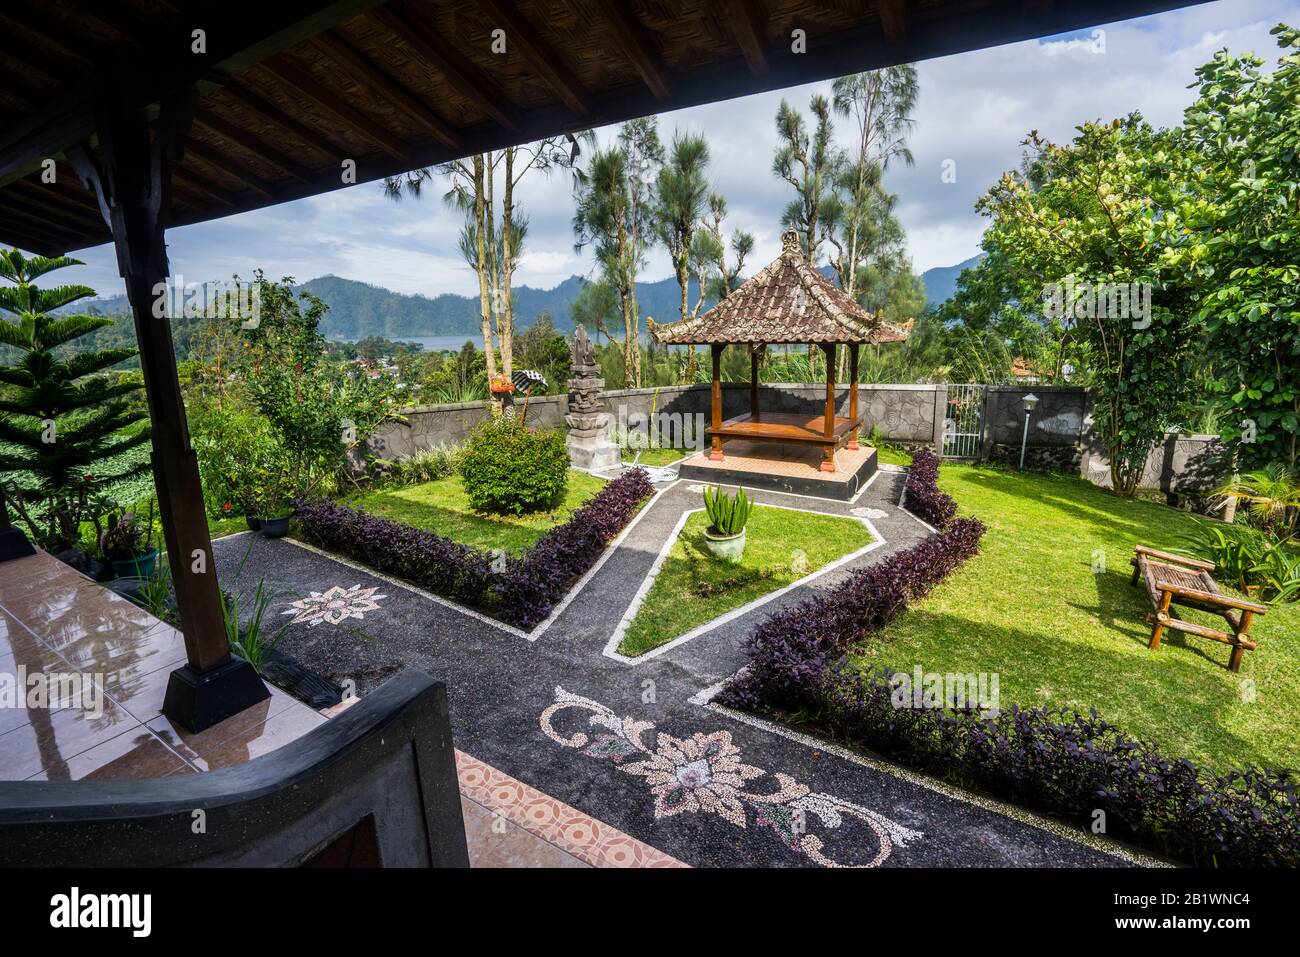 landscaped tropical garden with pavilion at Mapa Lakeview Bungalow on the slopes of Mount Batur, Bali, Indonesia Stock Photo